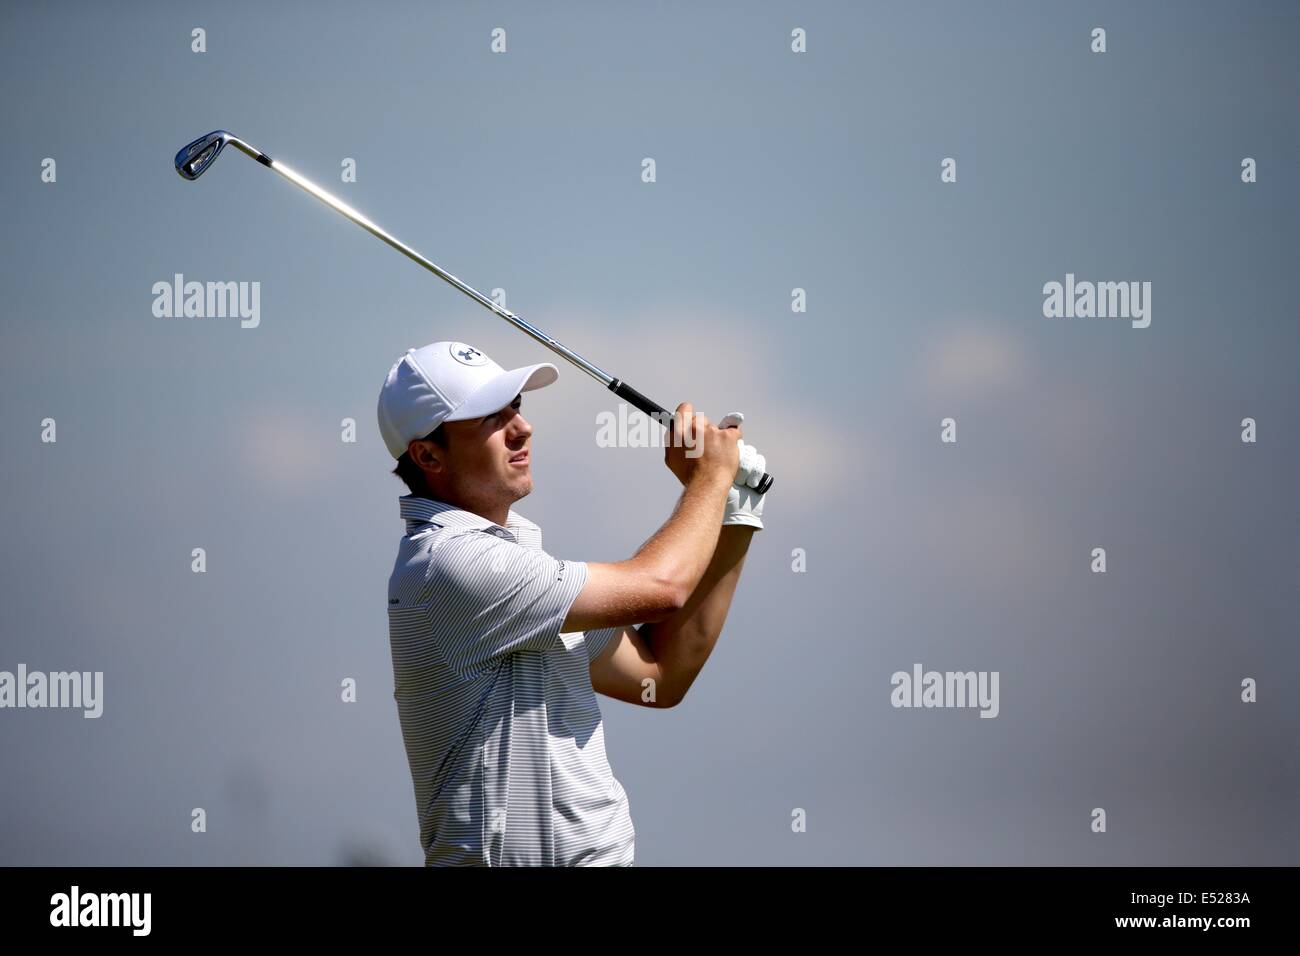 Jordan Spieth (USA), JULY 17 2014 - Golf : Jordan Spieth of the United States in action on the 9th hole during the first round of the 143rd British Open Championship at Royal Liverpool Golf Club in Hoylake, England. (Photo by Koji Aoki/AFLO SPORT) Stock Photo